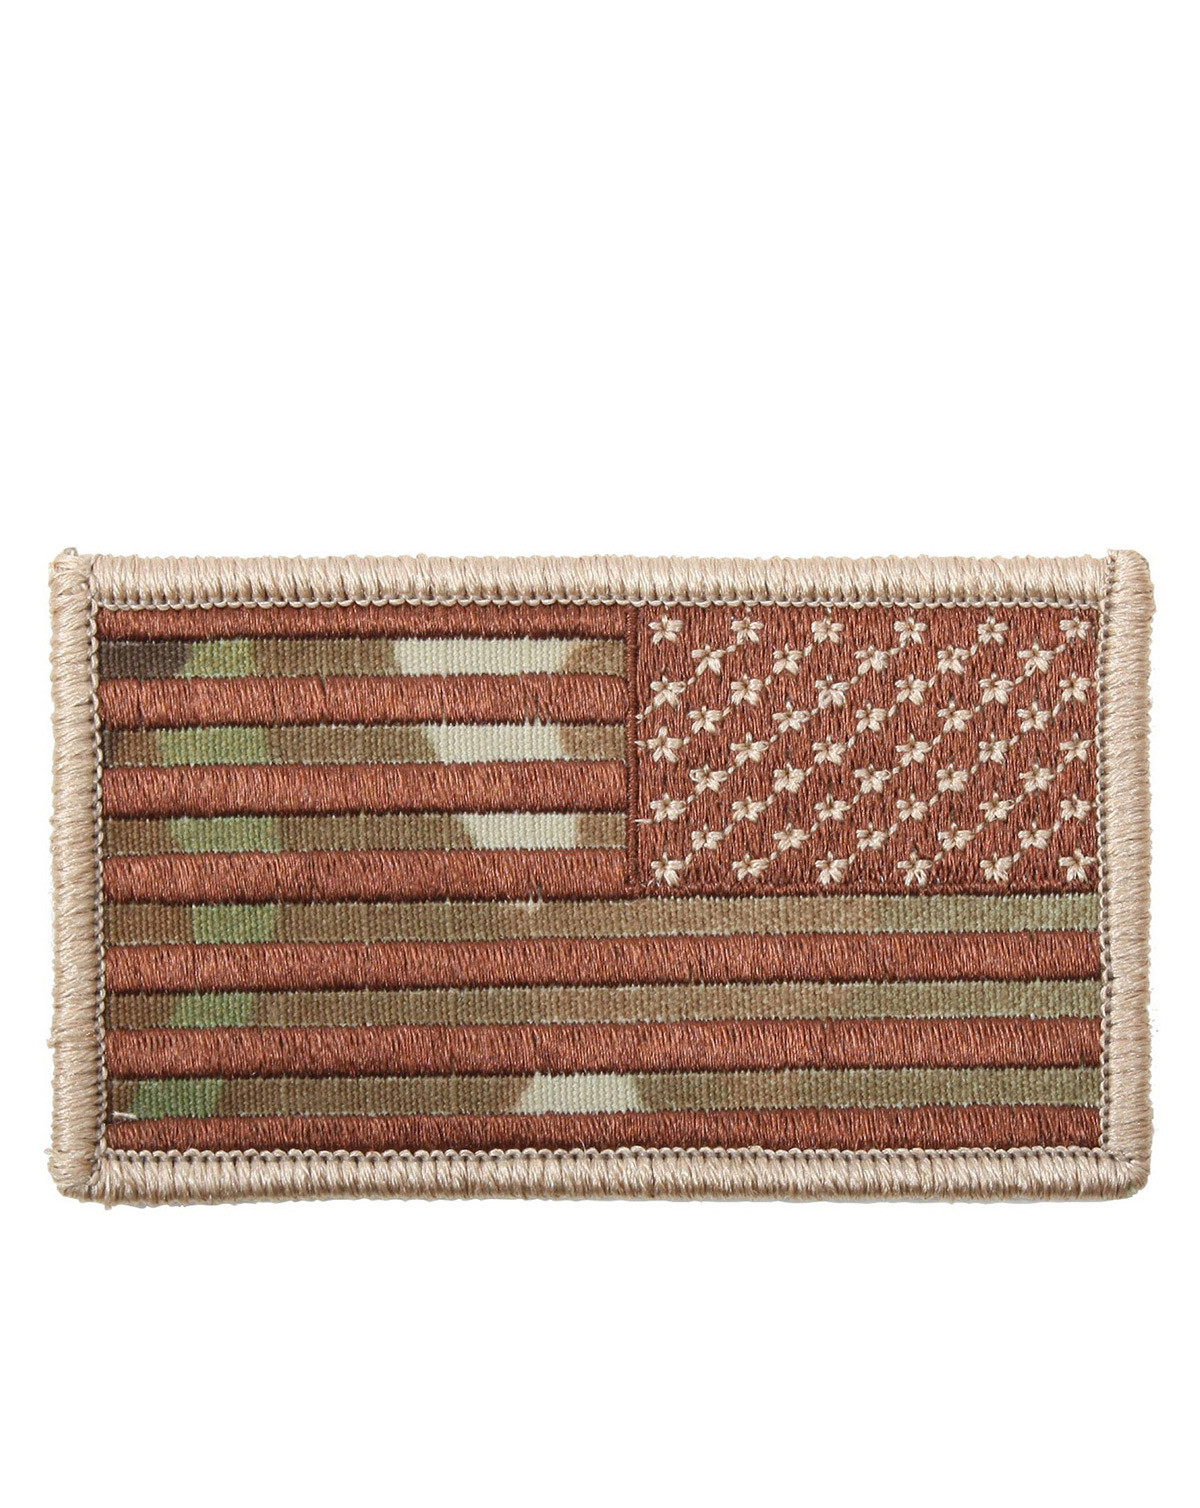 Rothco Patch - American Flag (Multicam, One Size)